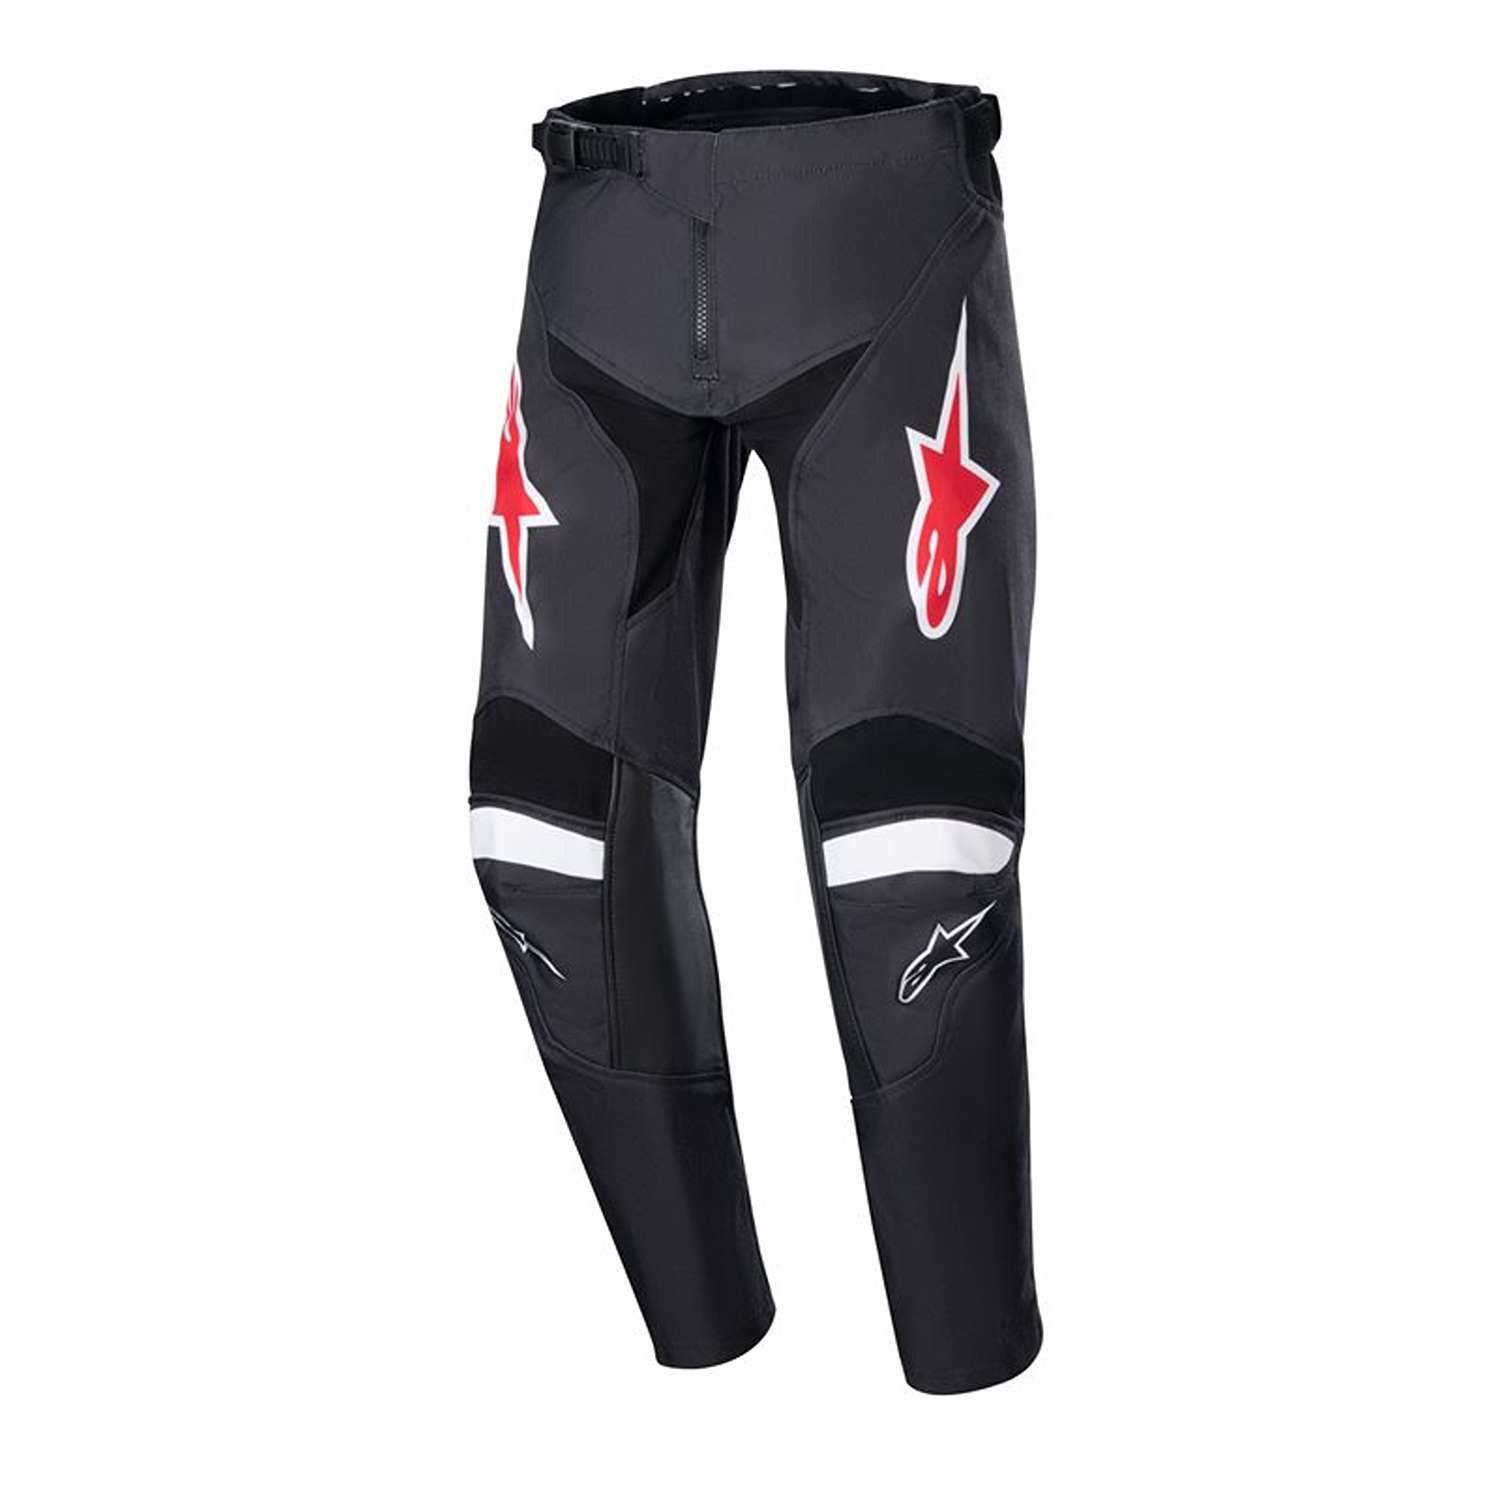 Image of Alpinestars Youth Racer Lucent Pants Black White Talla 22